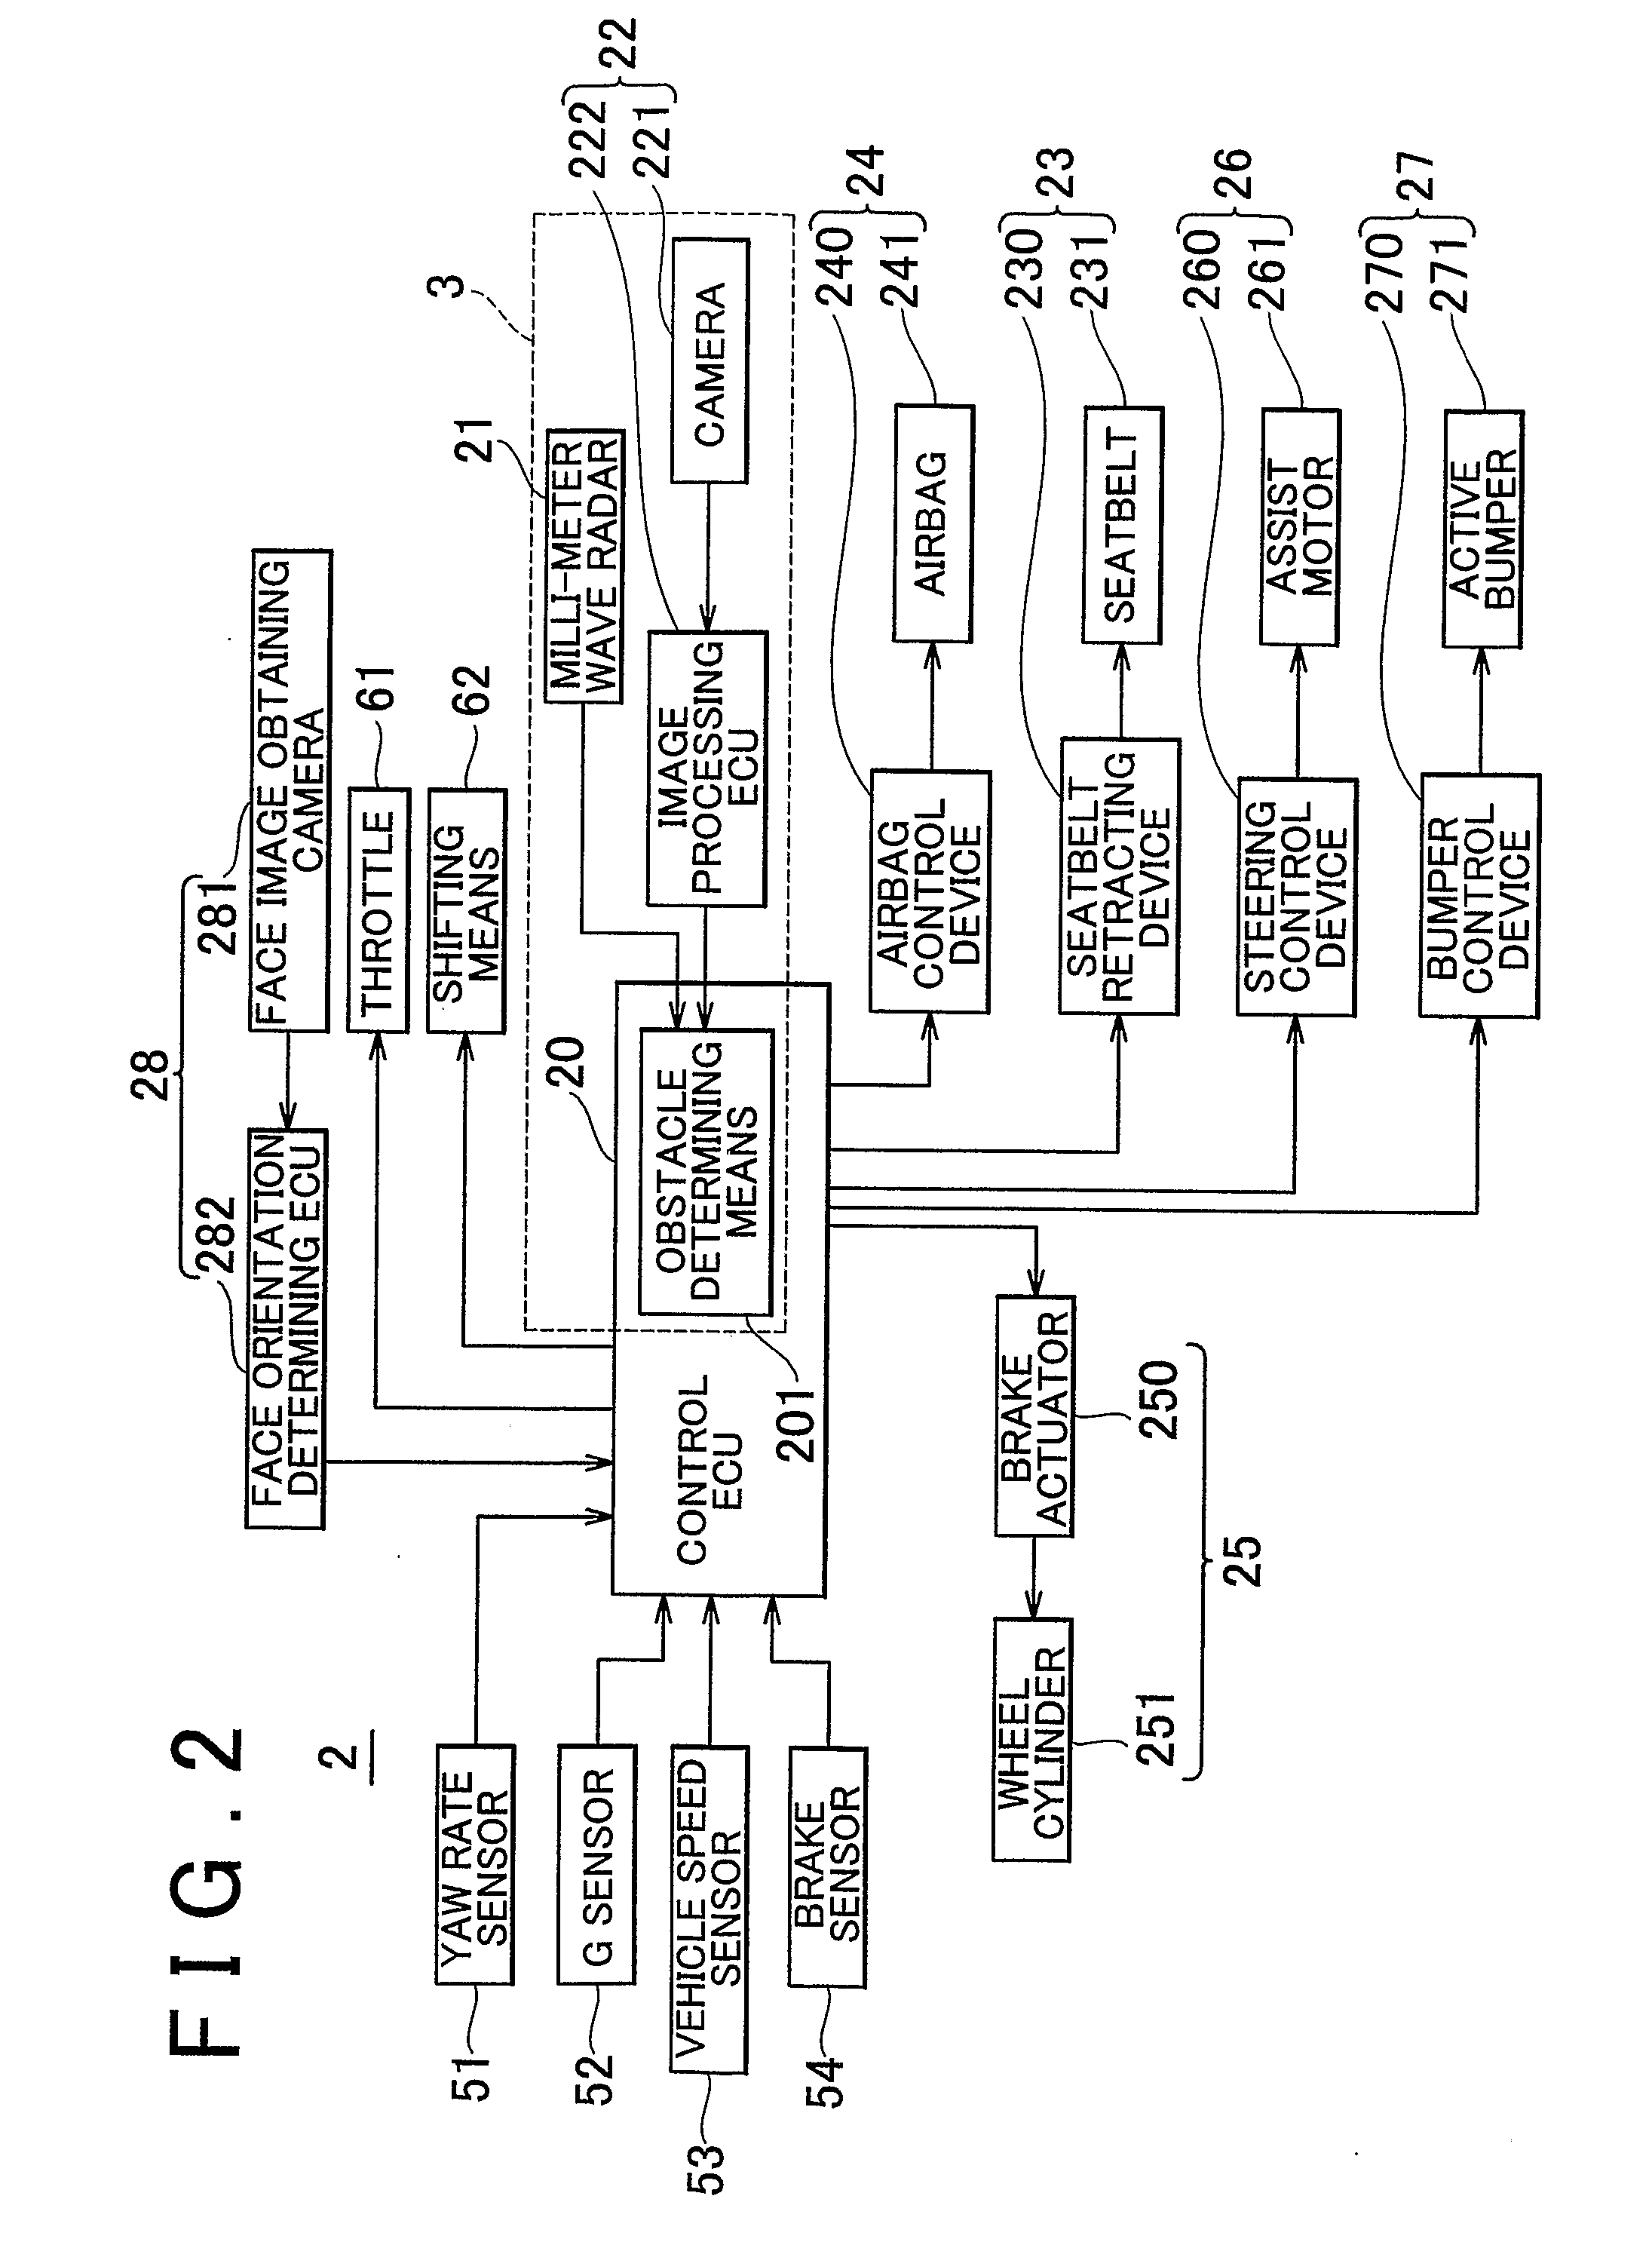 Running support system for vehicle